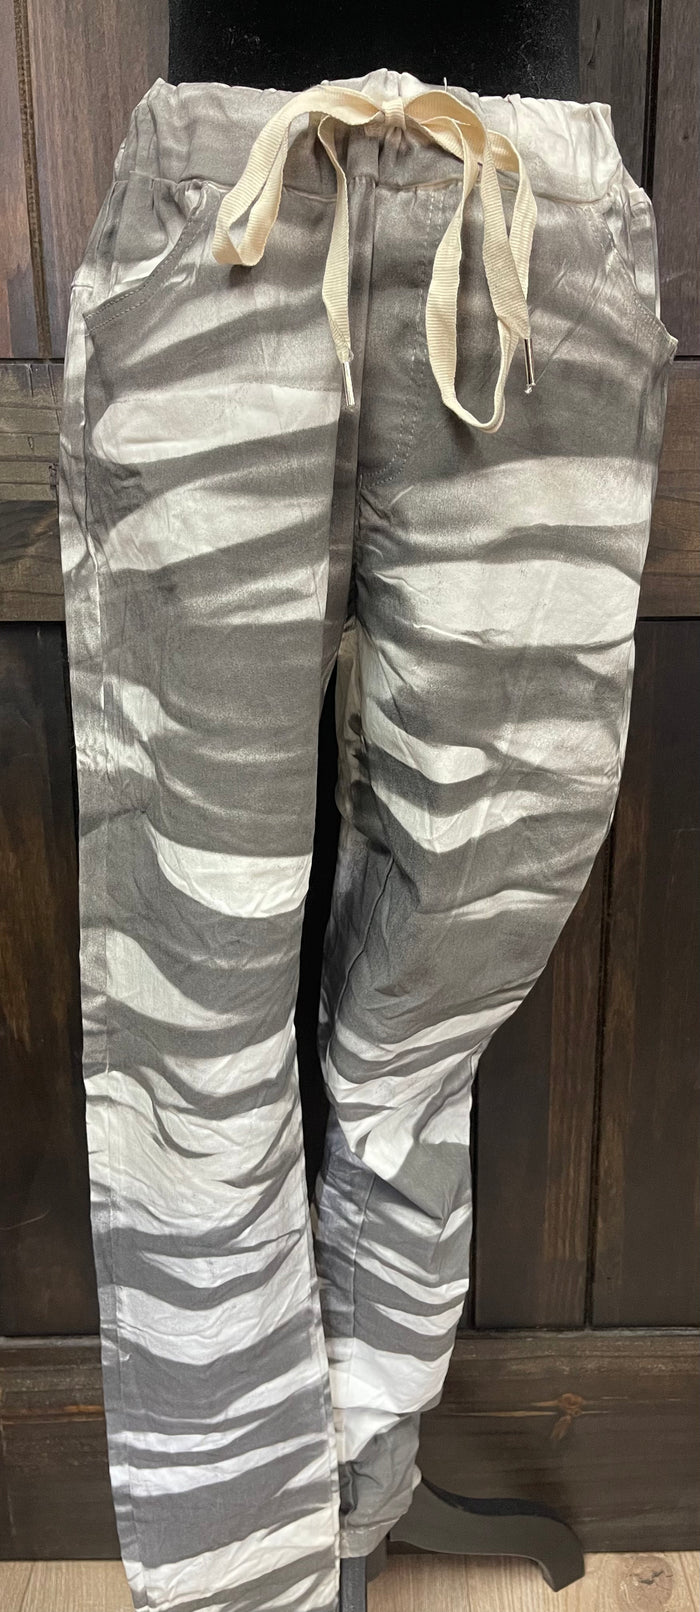 Casual Comfy Pants- White & Grey "Tradition Tie Dye"